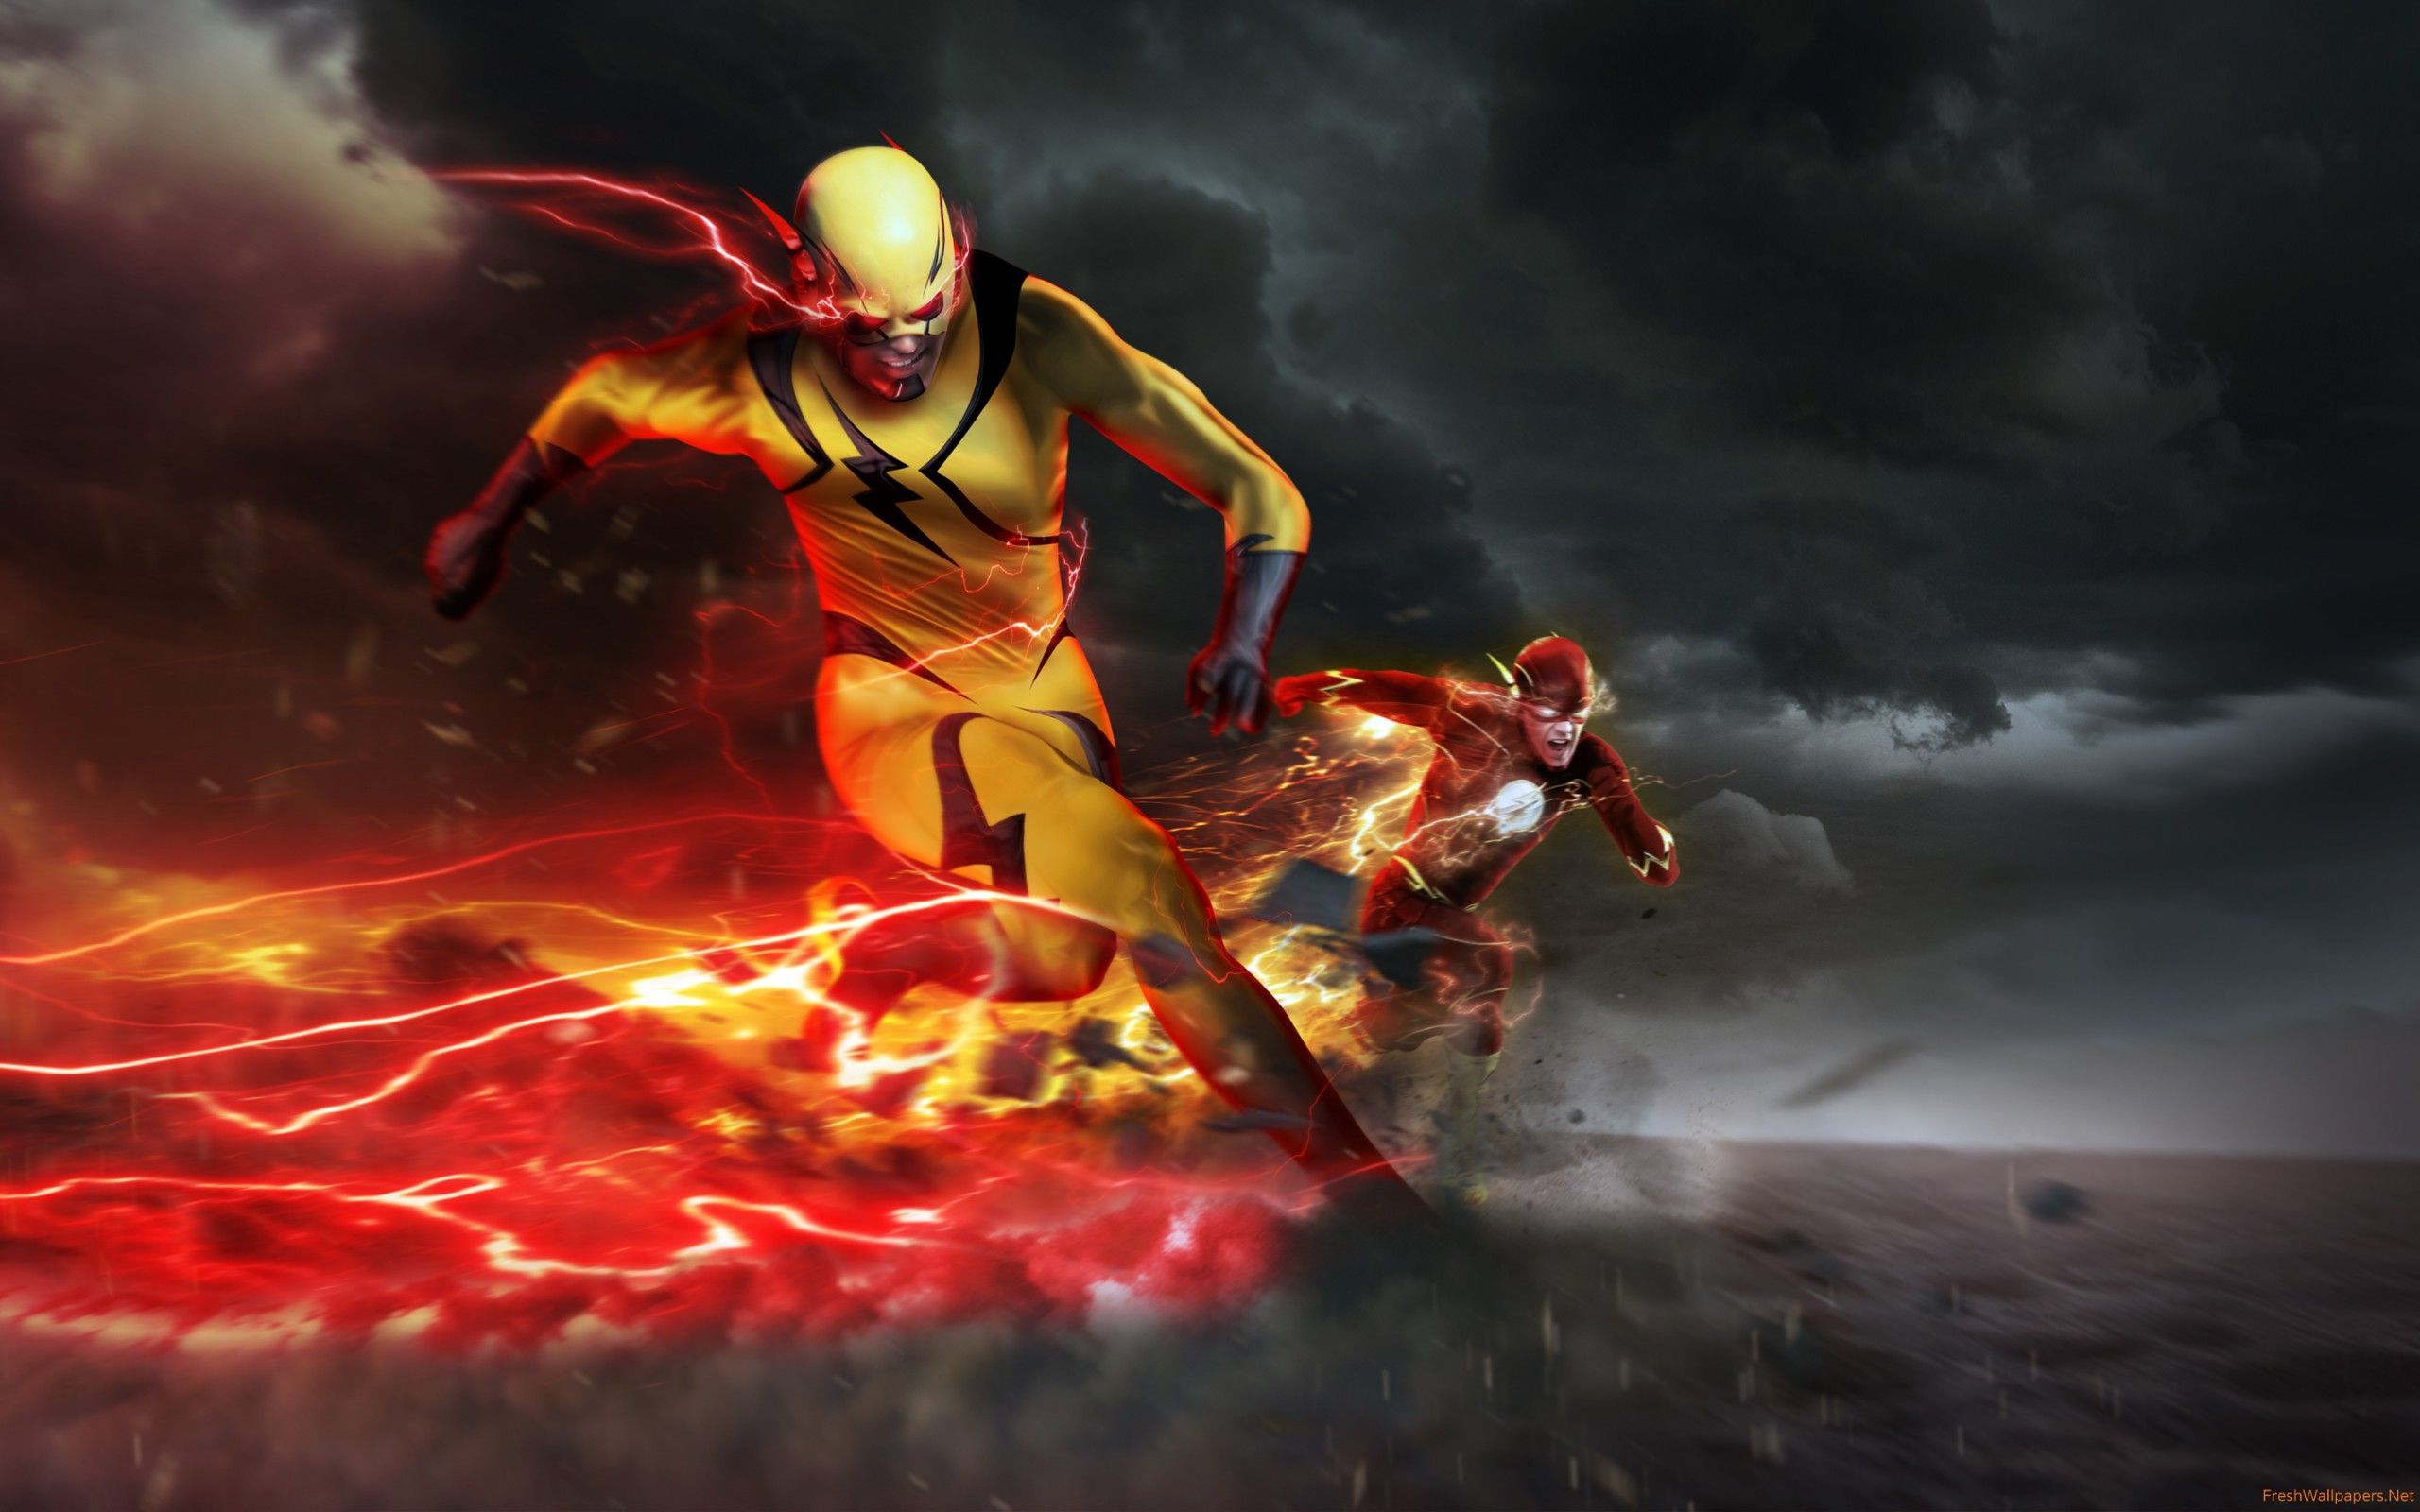 Eobard Thawne as Professor Zoom in The Flash wallpapers